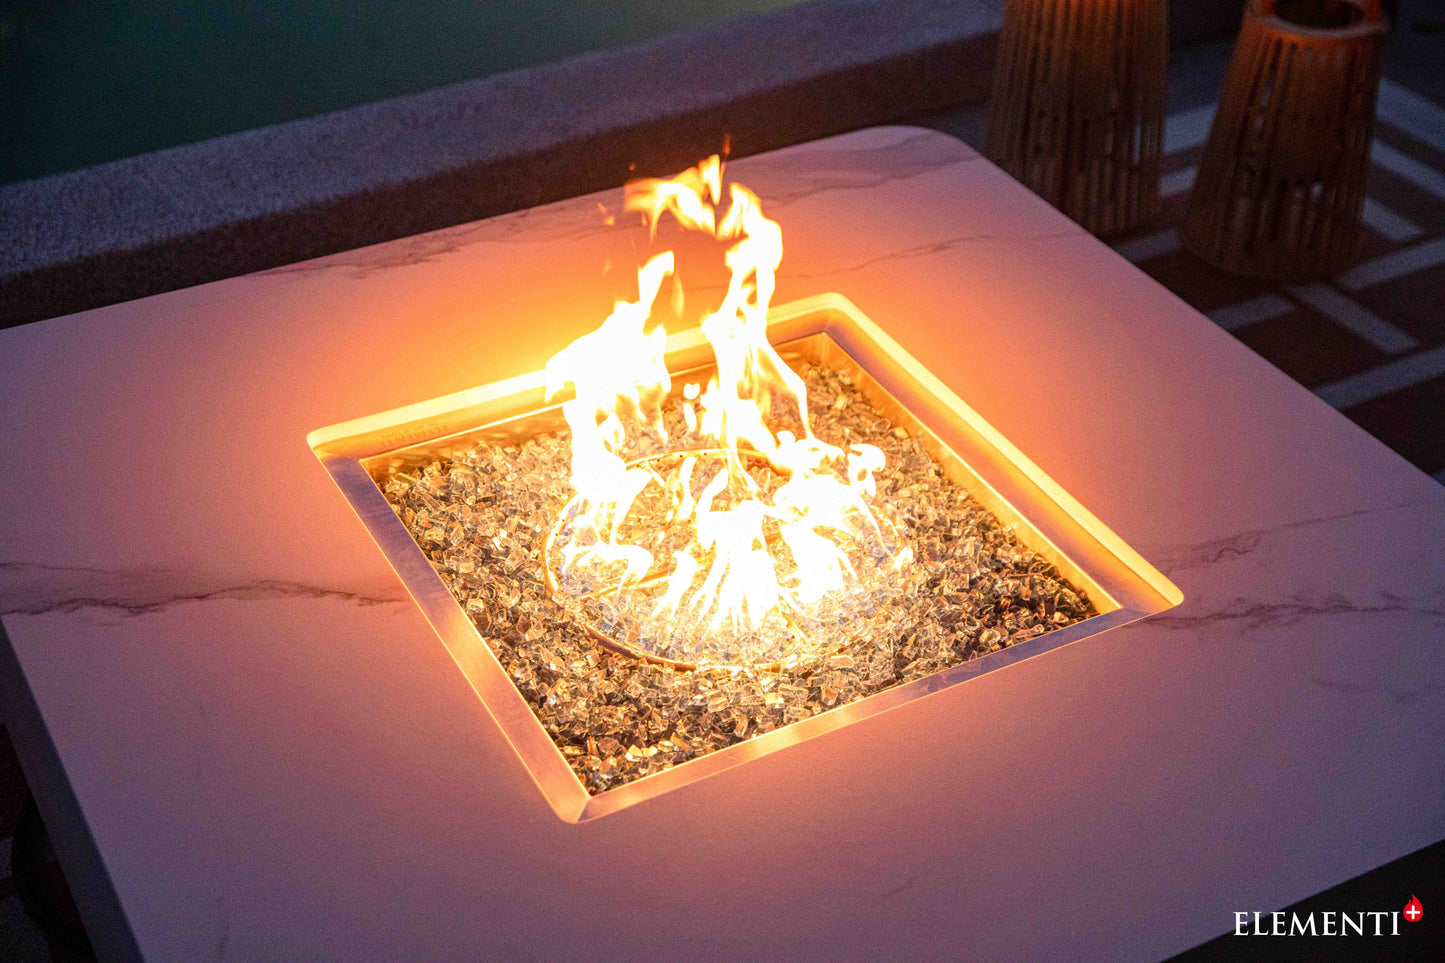 Annecy Modern Marble and Concrete Square Fire Pit Table